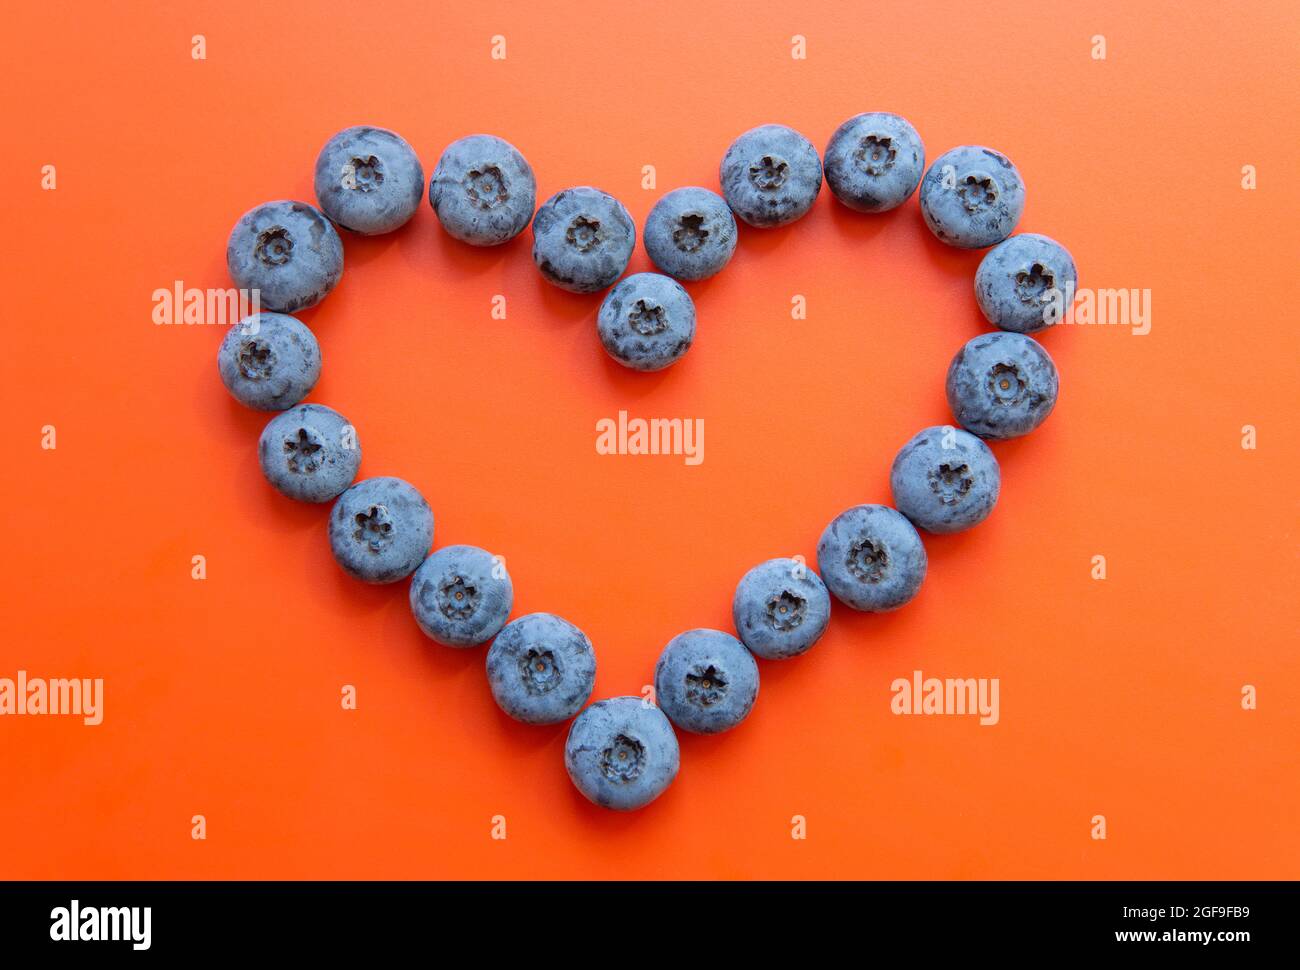 Heart shape made from blueberries on a red background. Heart disease prevention concept. Stock Photo